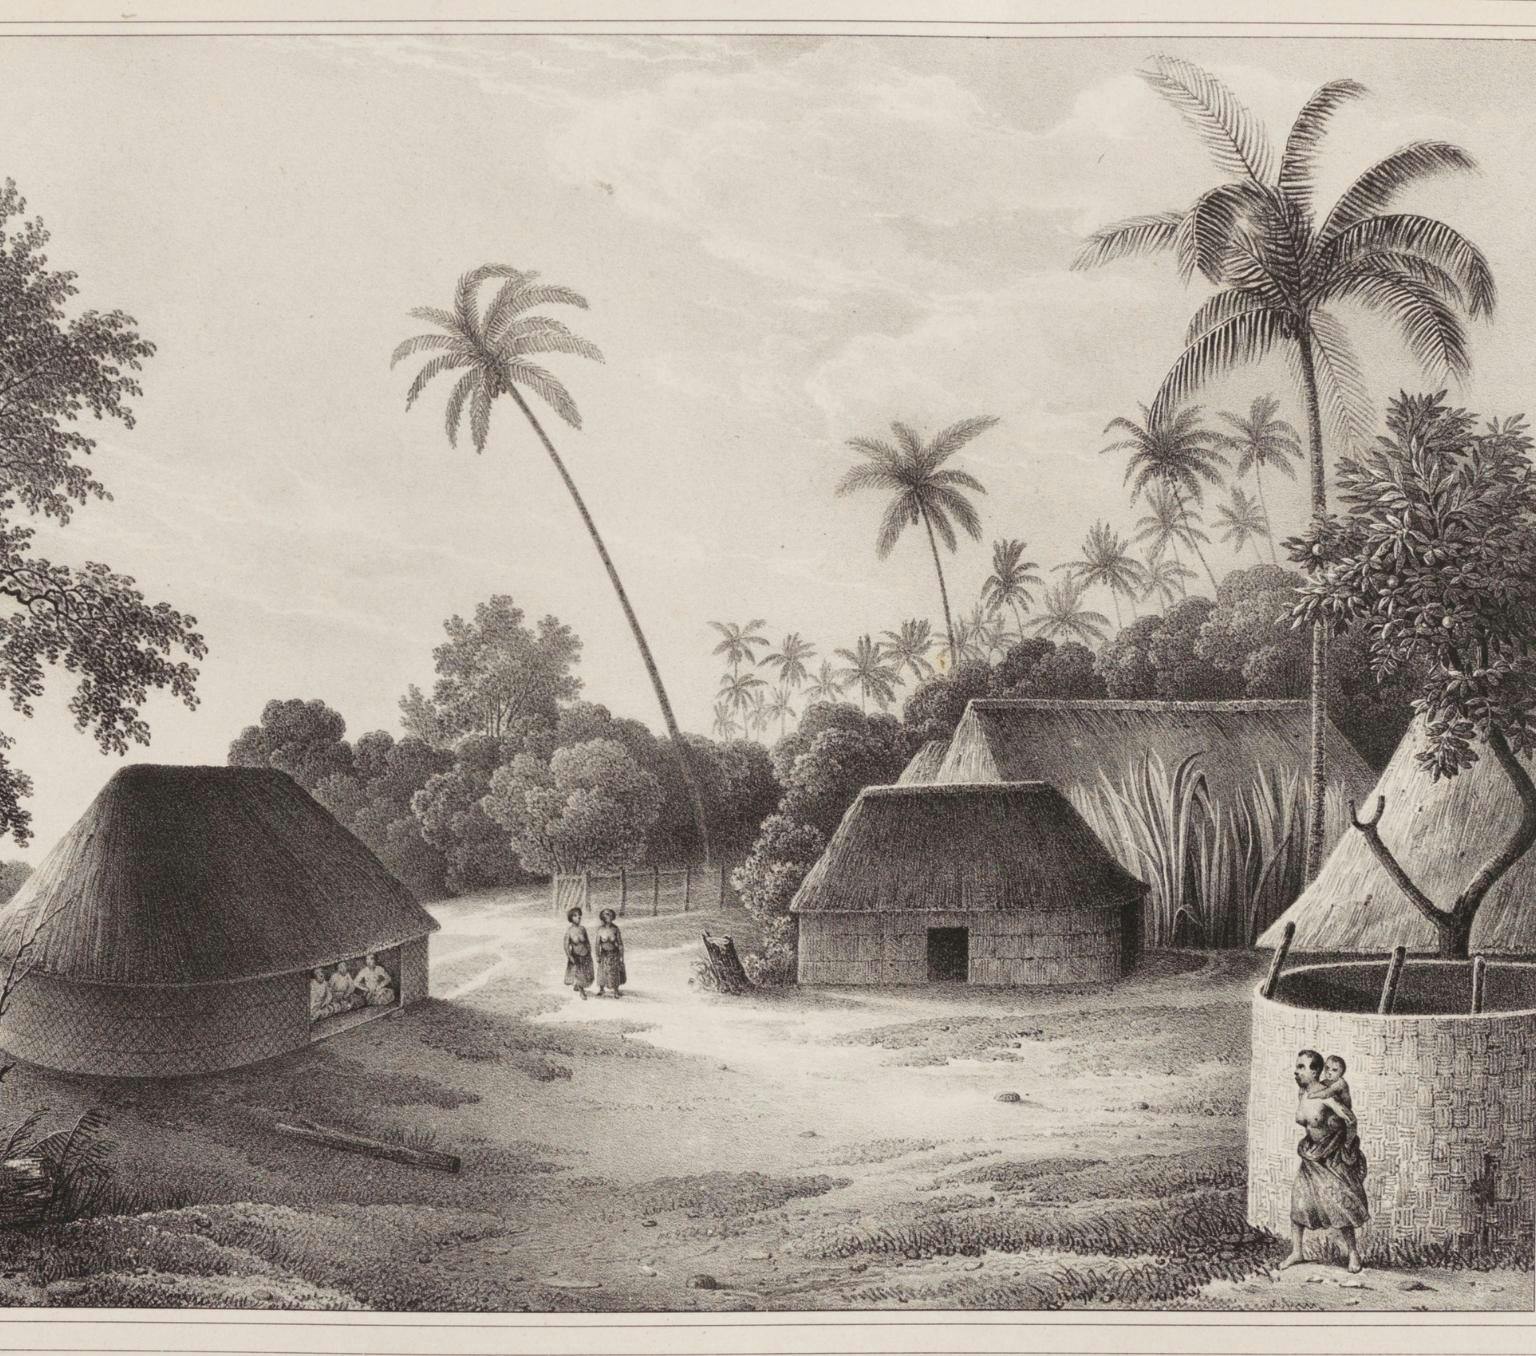 black and whit esketch of single story huts and tall palm-like trees